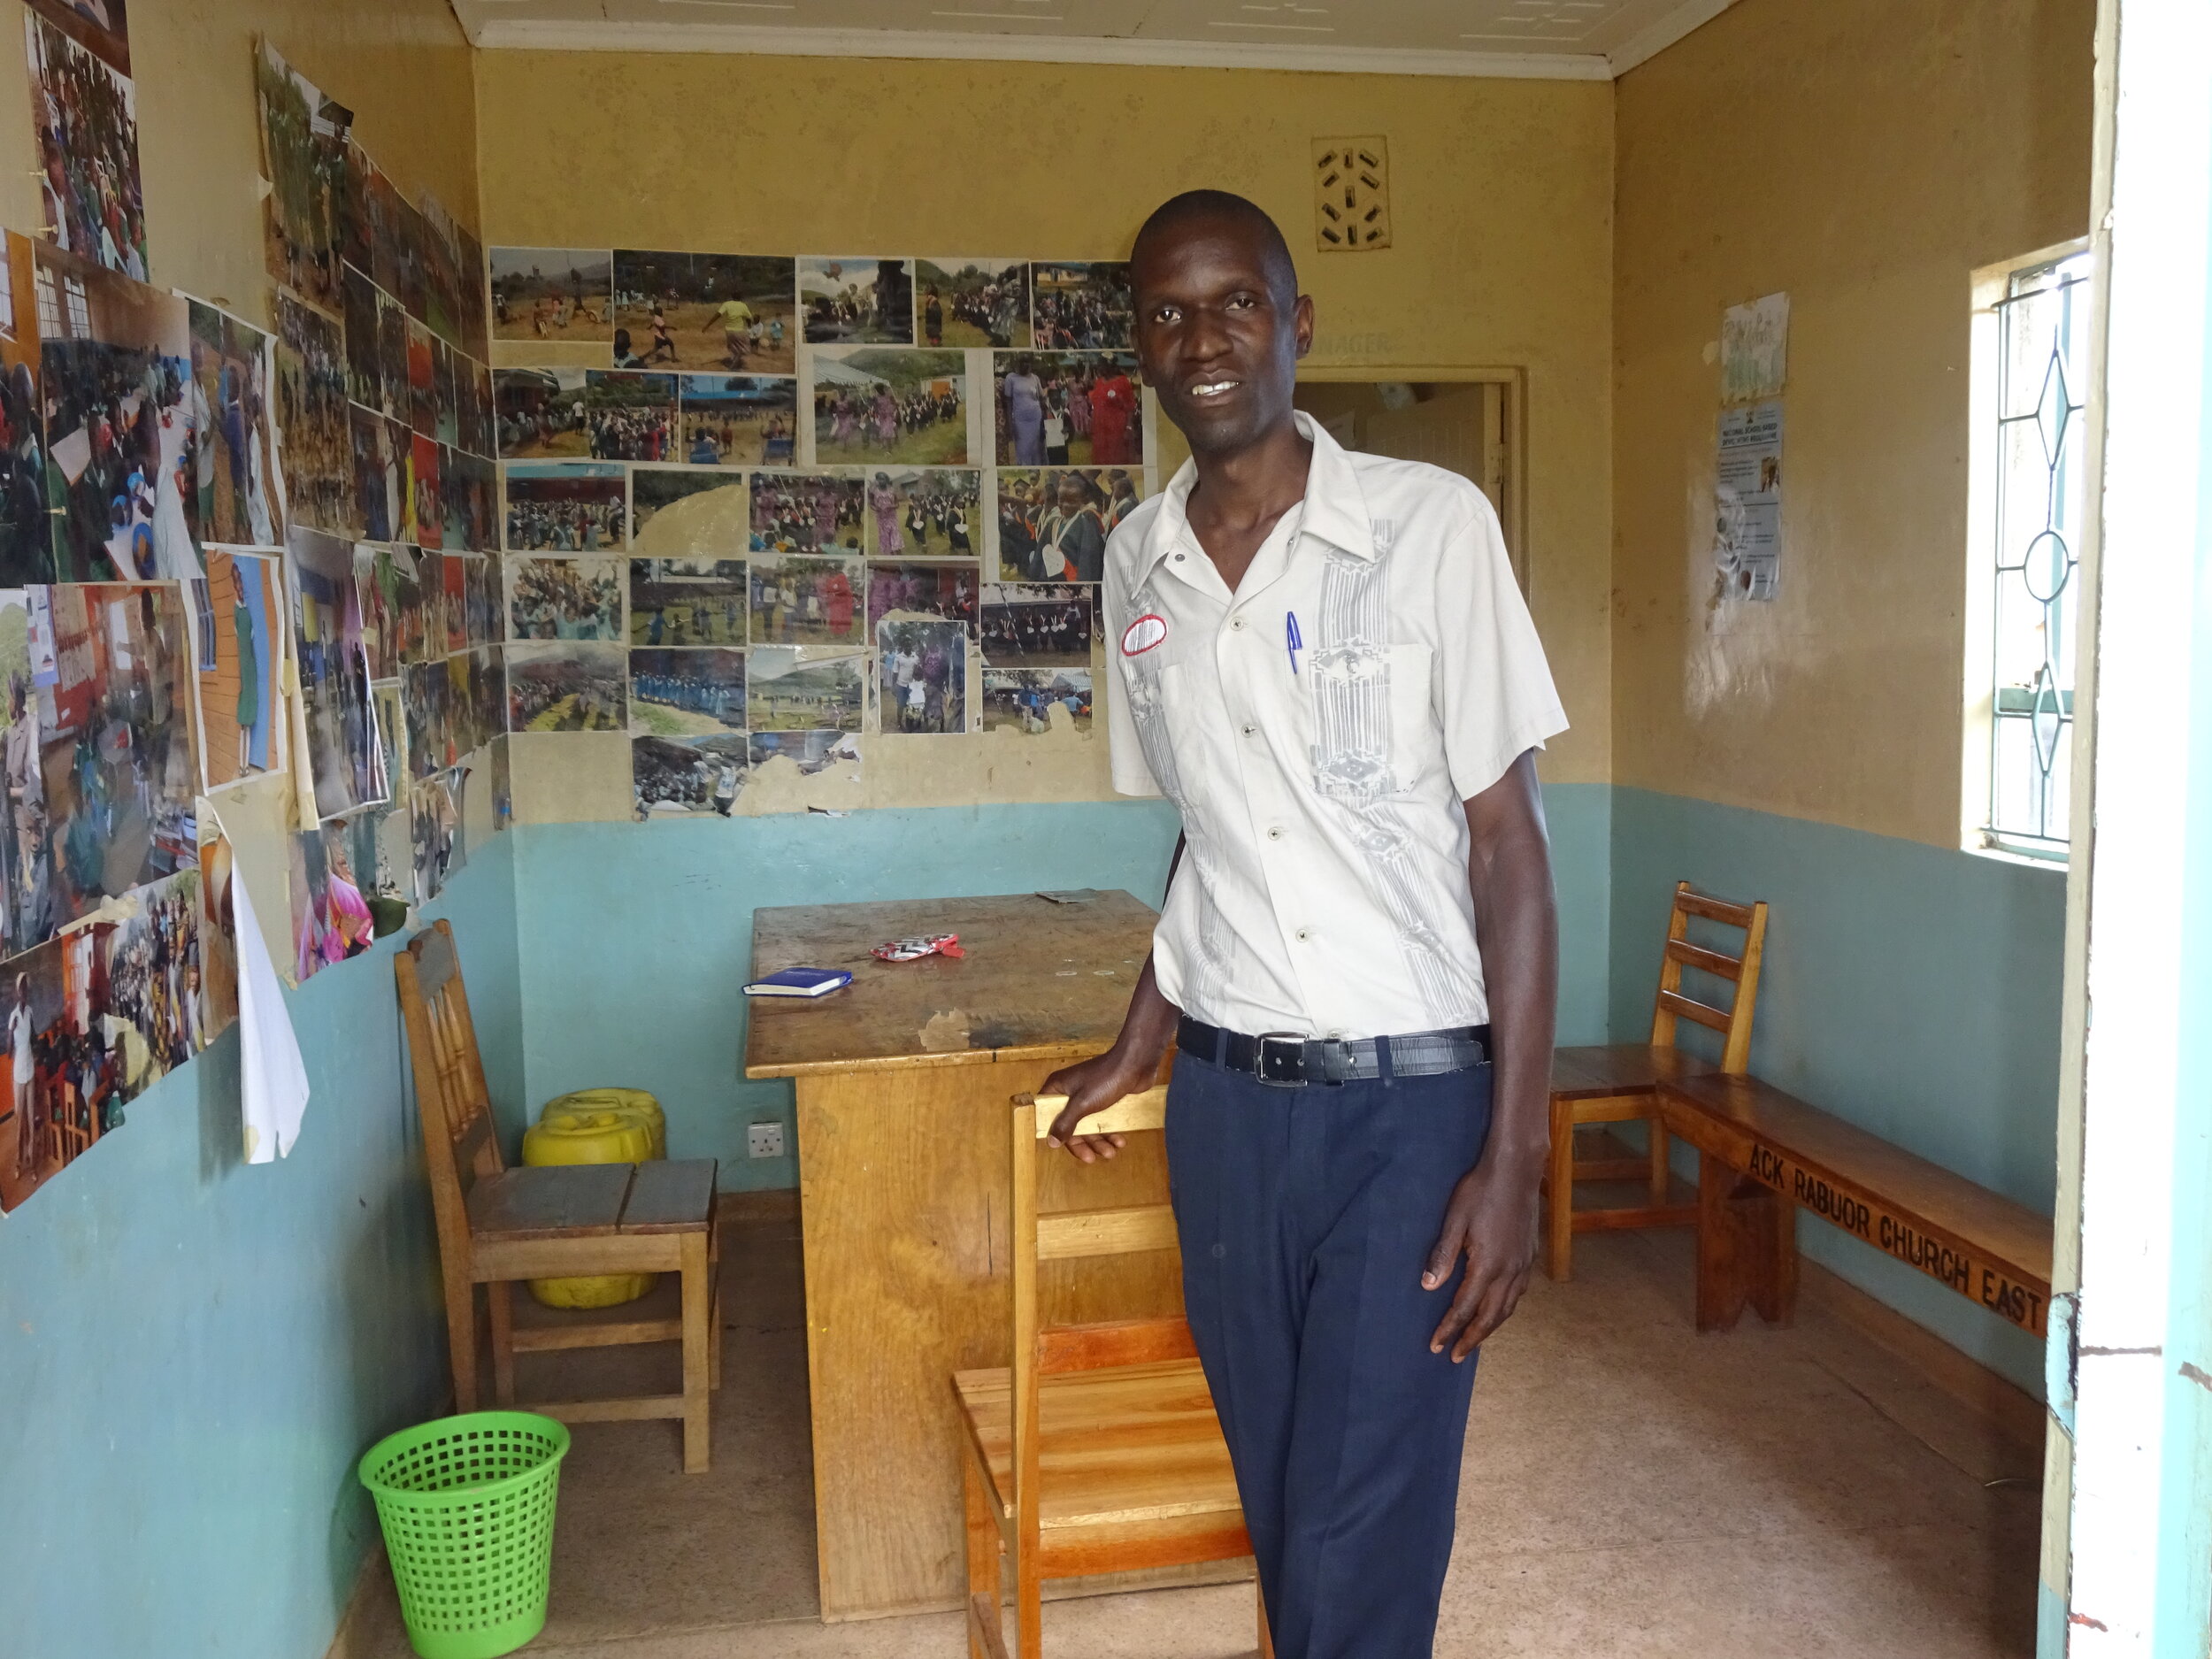 Kevin, one of the Mwanzo teachers, is standing in a small room filled with pictures on the walls and with a desk and two chairs. Sunlight is streaming in through a window.